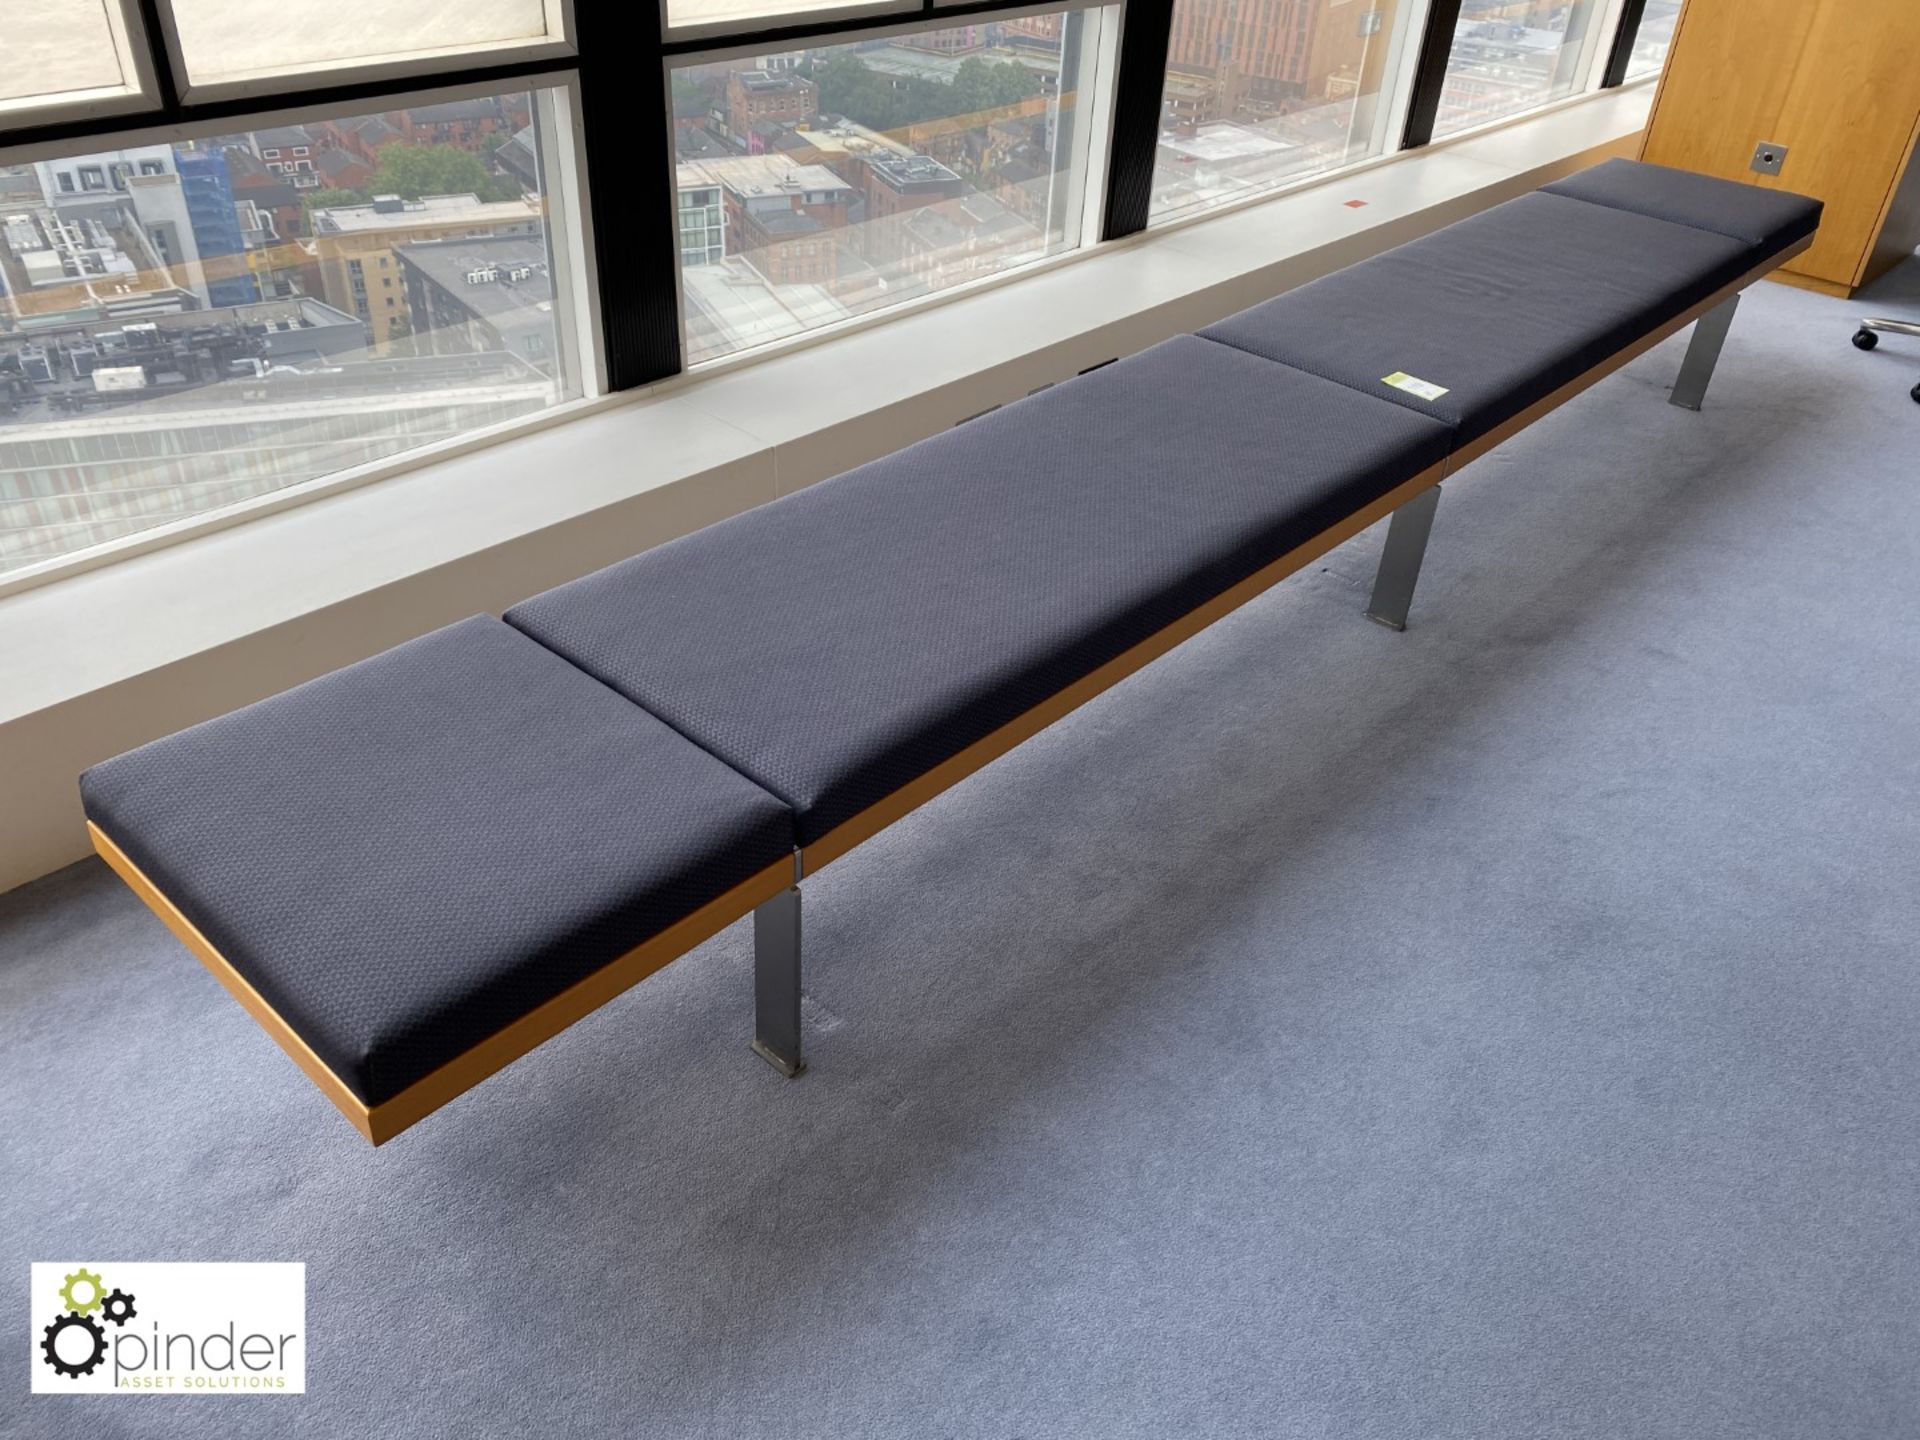 Upholstered Bench Unit, 4200mm x 600mm (located in Boardroom on 24th Floor) - Image 2 of 4